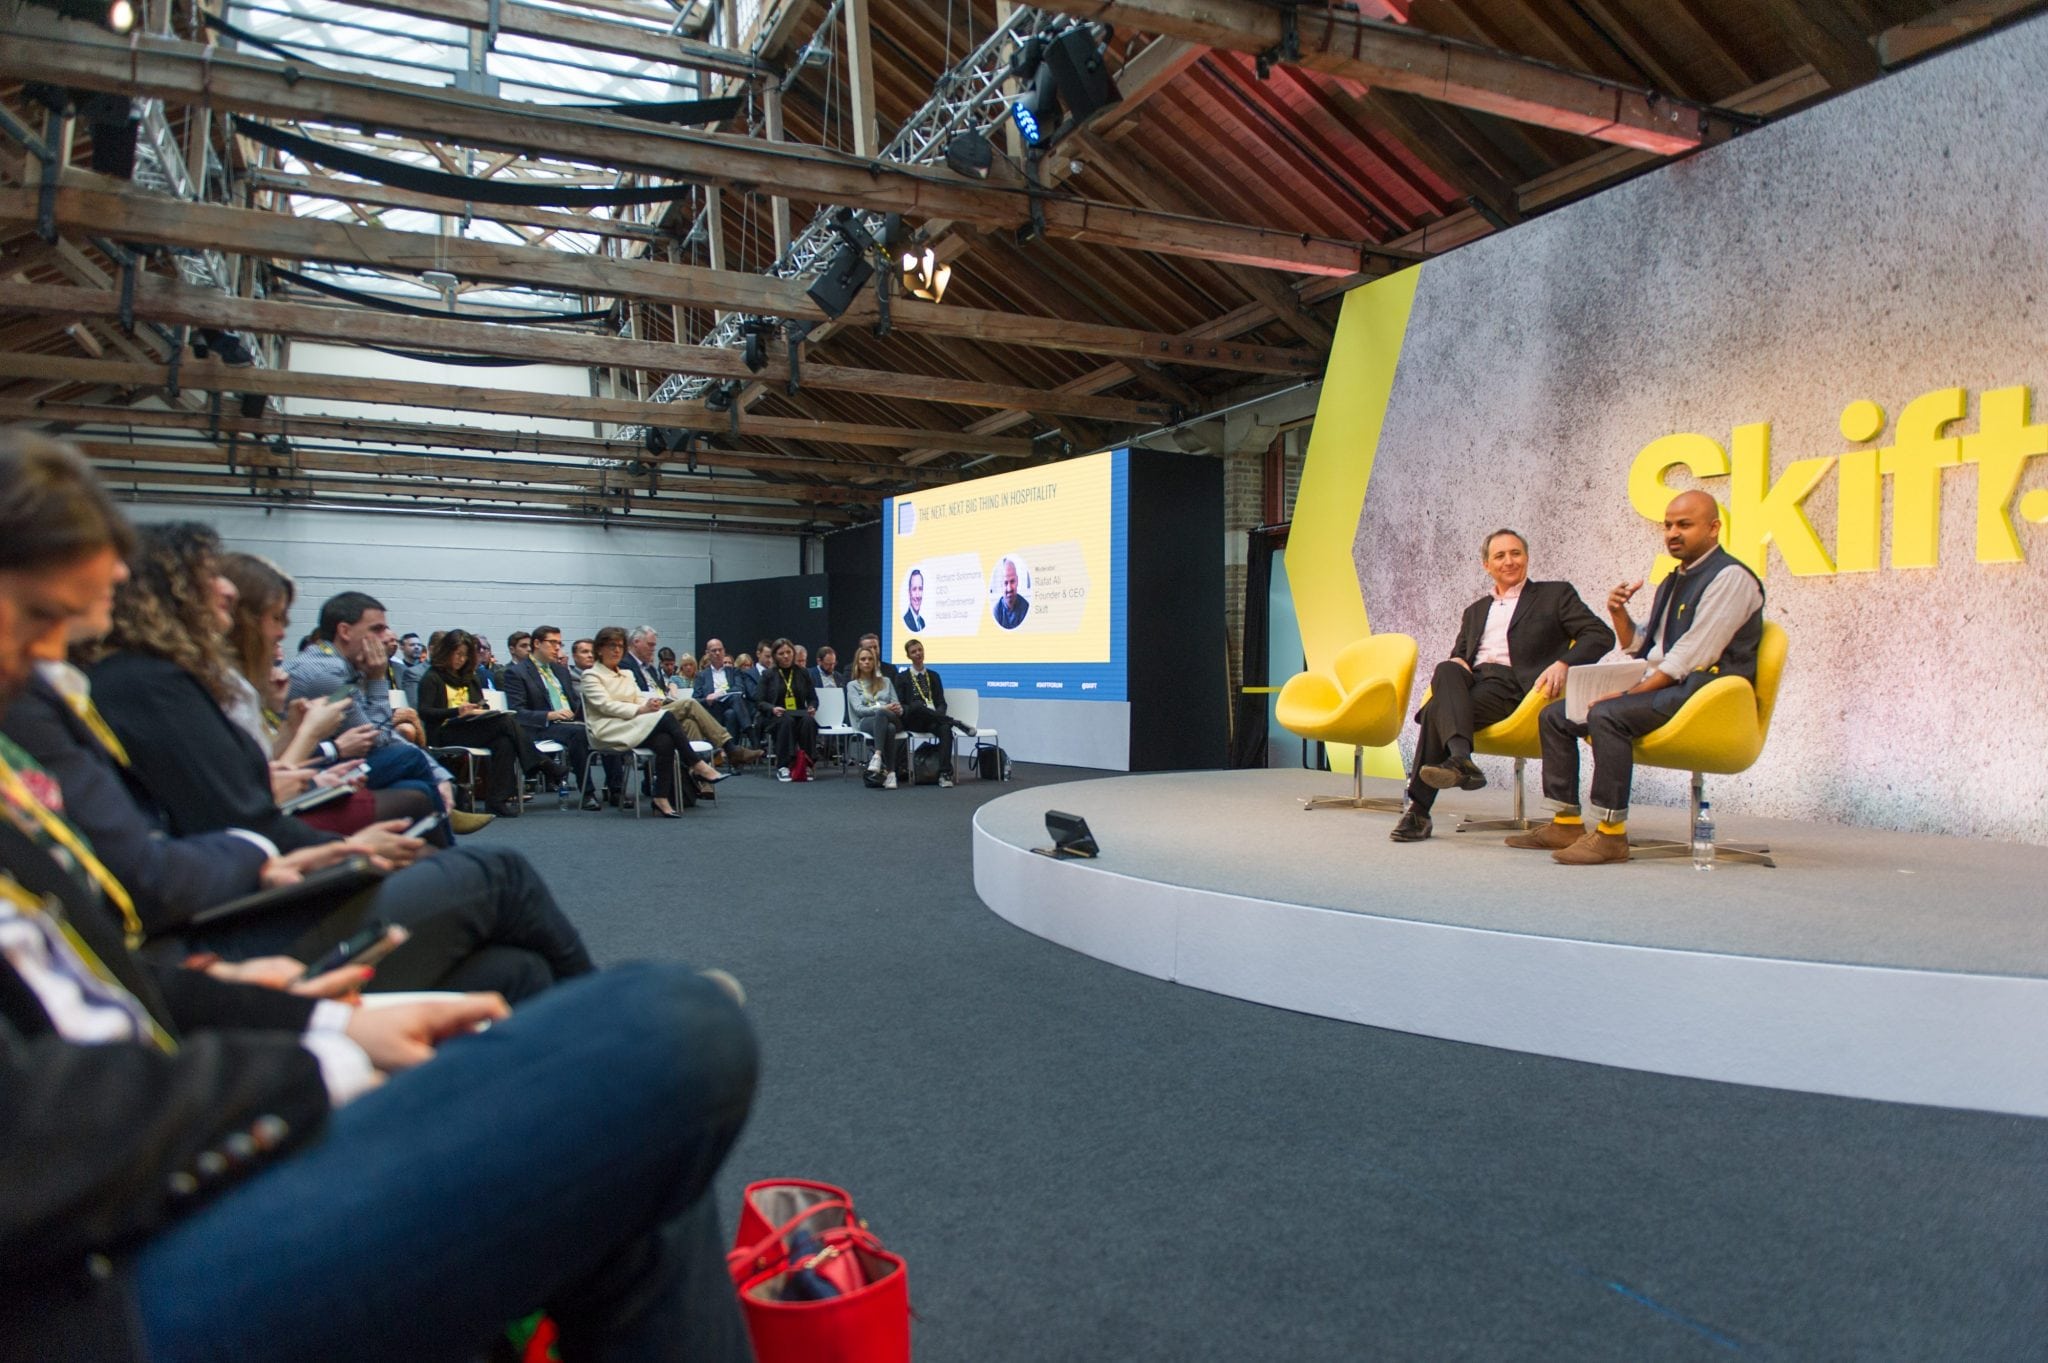 InterContinental Hotels Group CEO Richard Solomons speaking with Skift's Rafat Ali (R) at Skift Forum Europe in London on April 4, 2017. 